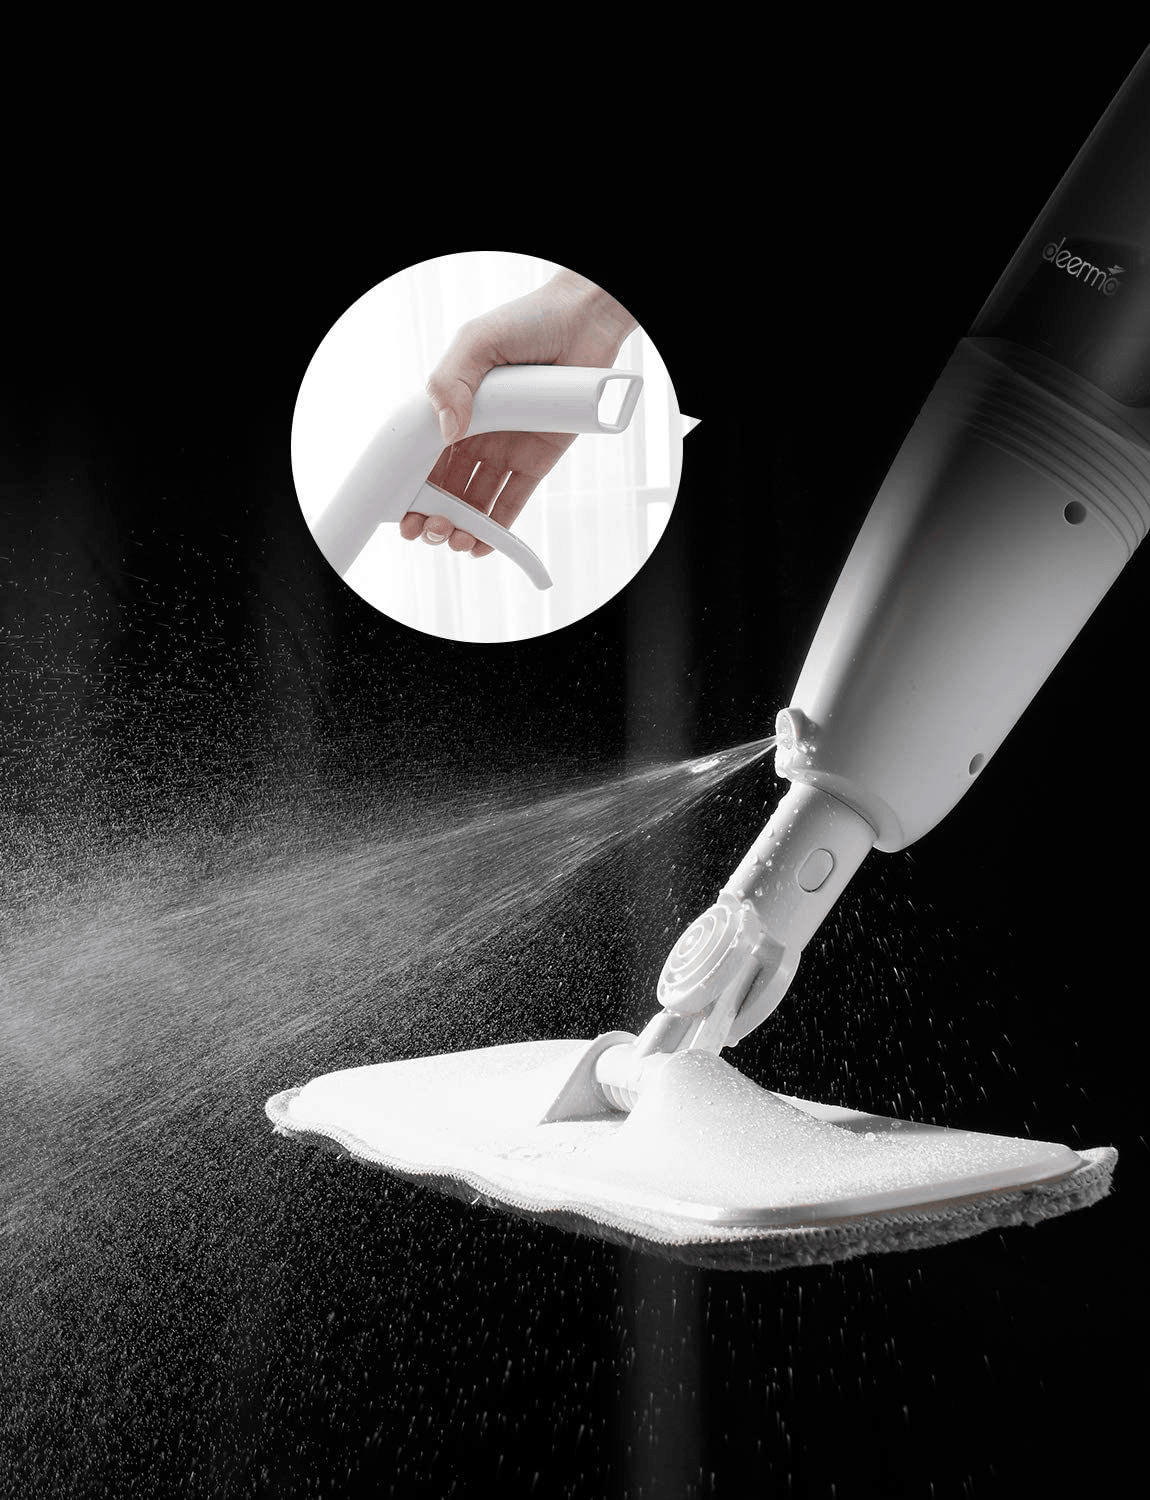 360° Rotation Water Tank Spray Mop for Home Kitchen - VirtuousWares:Global